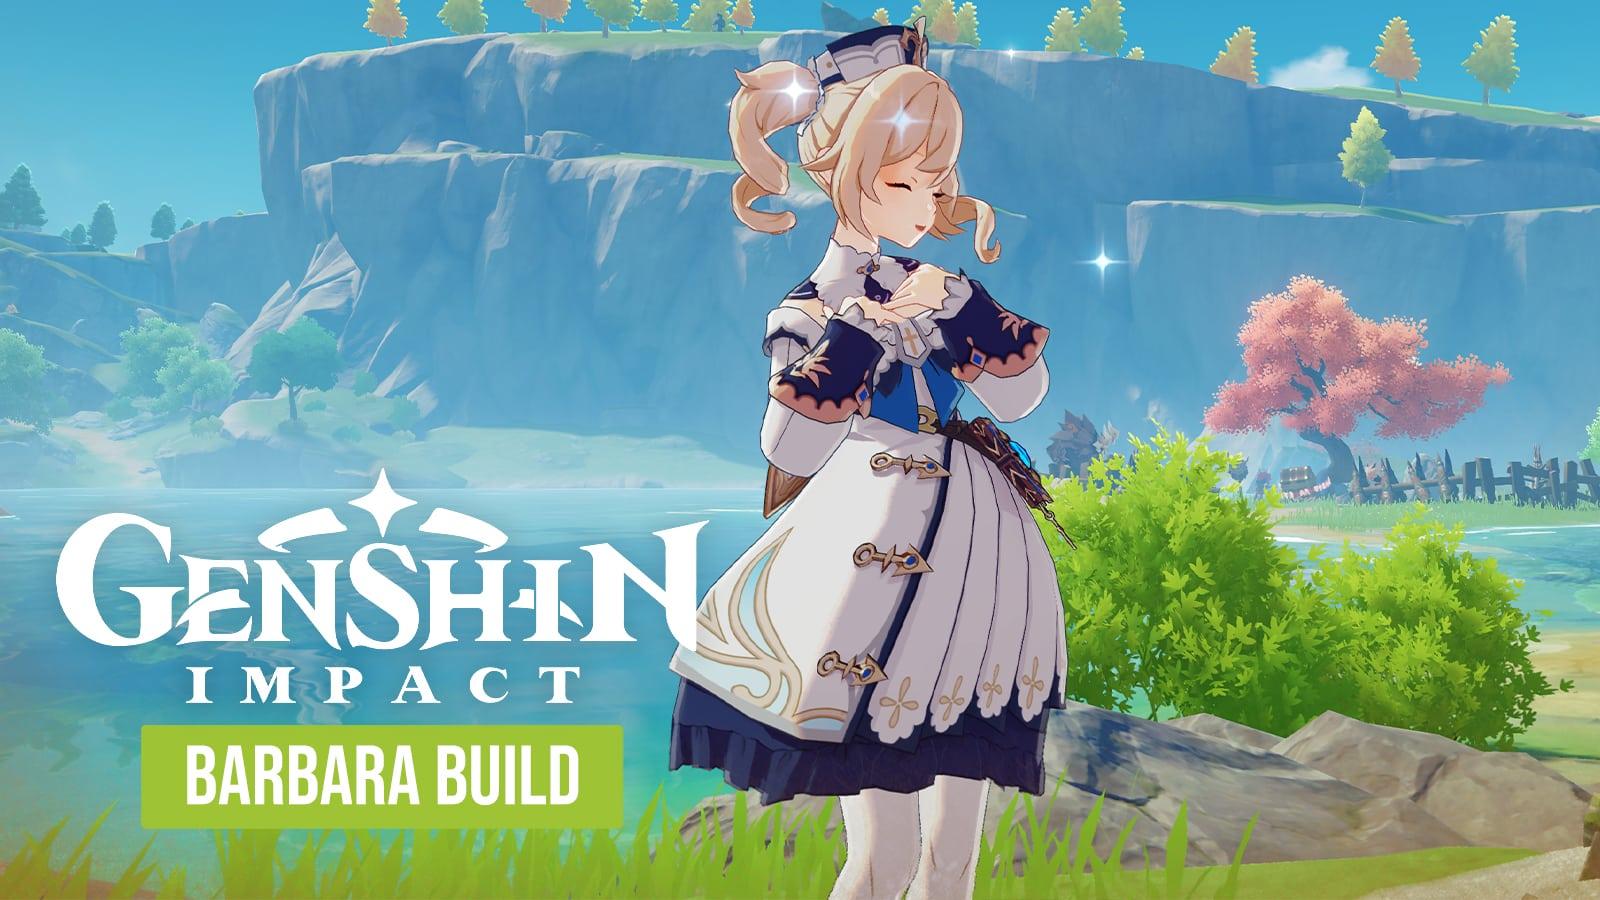 Barbara standing by a river in Teyvat with the Genshin Impact logo and build in text